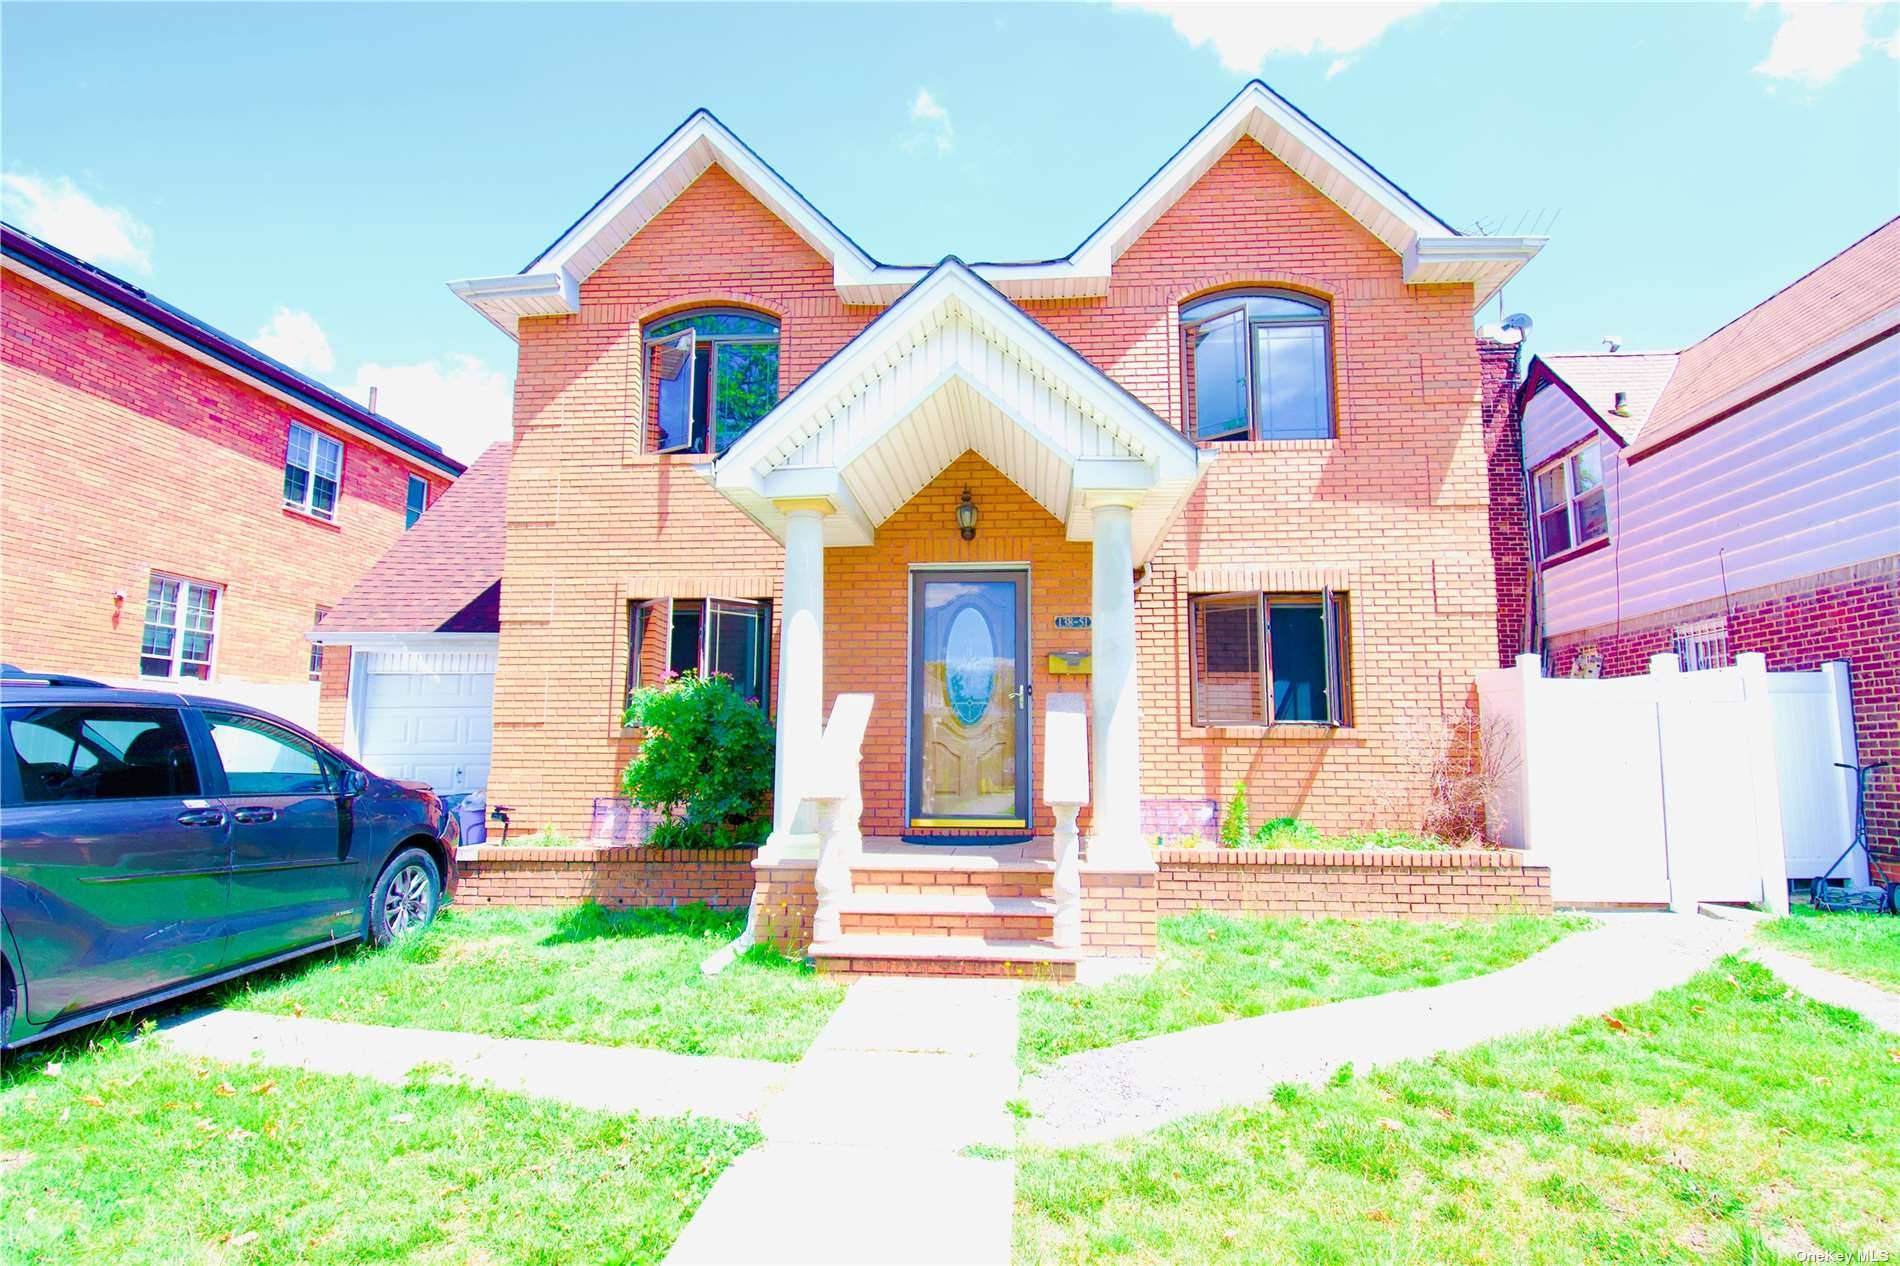 Detached single family brick house located in heart of flushing, close to Main street and Long Island Express way, walk distance to supermarket and many restaurants nearby, close to Queens ...